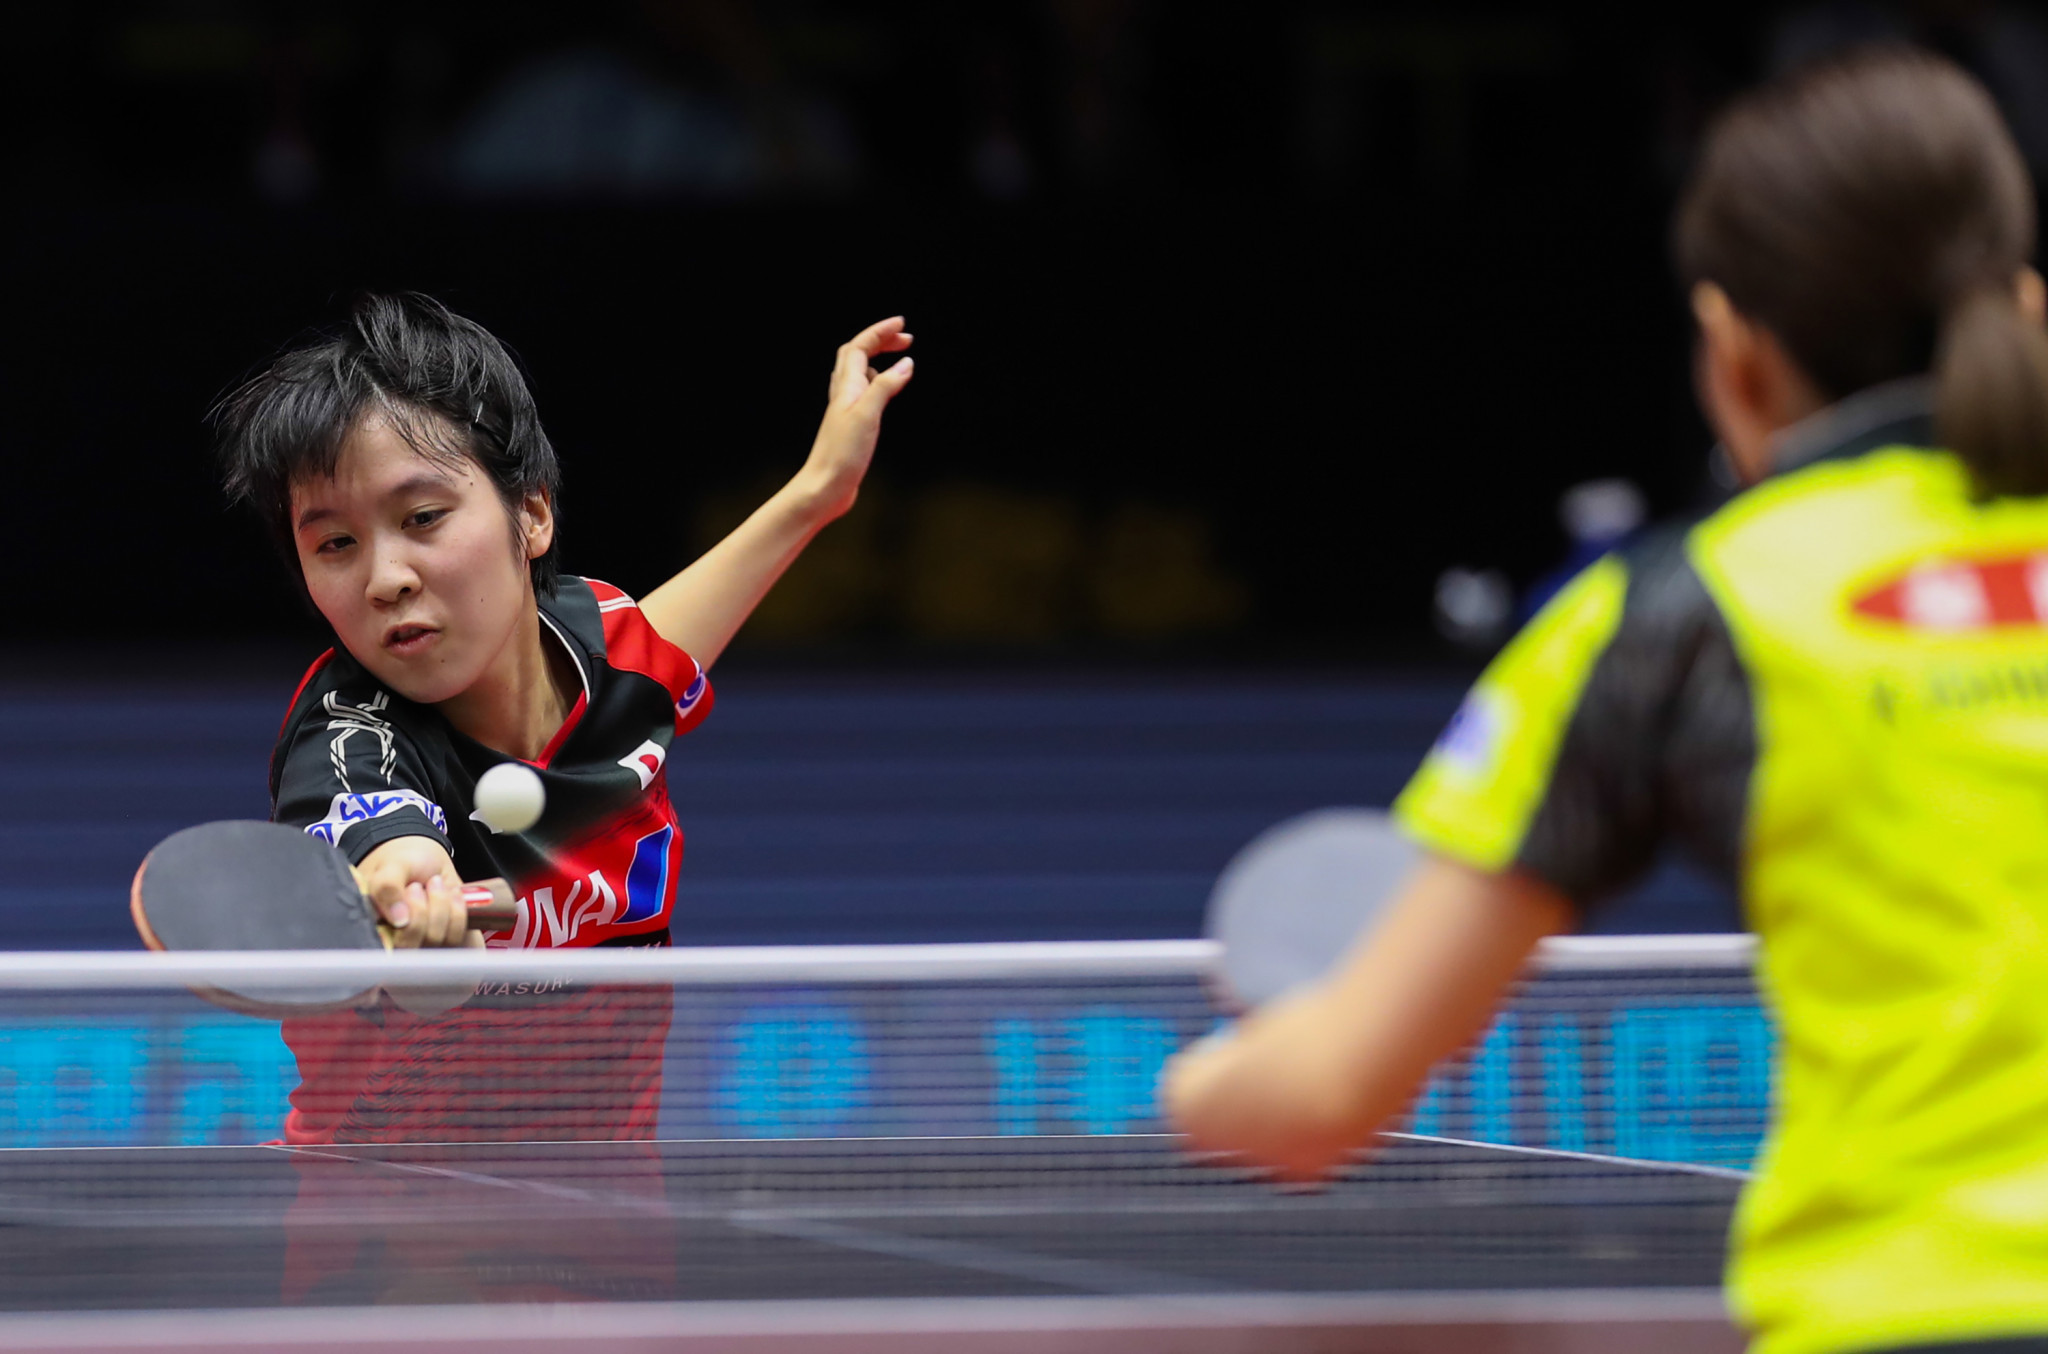 International Table Tennis Federation discuss expansion of World Championships